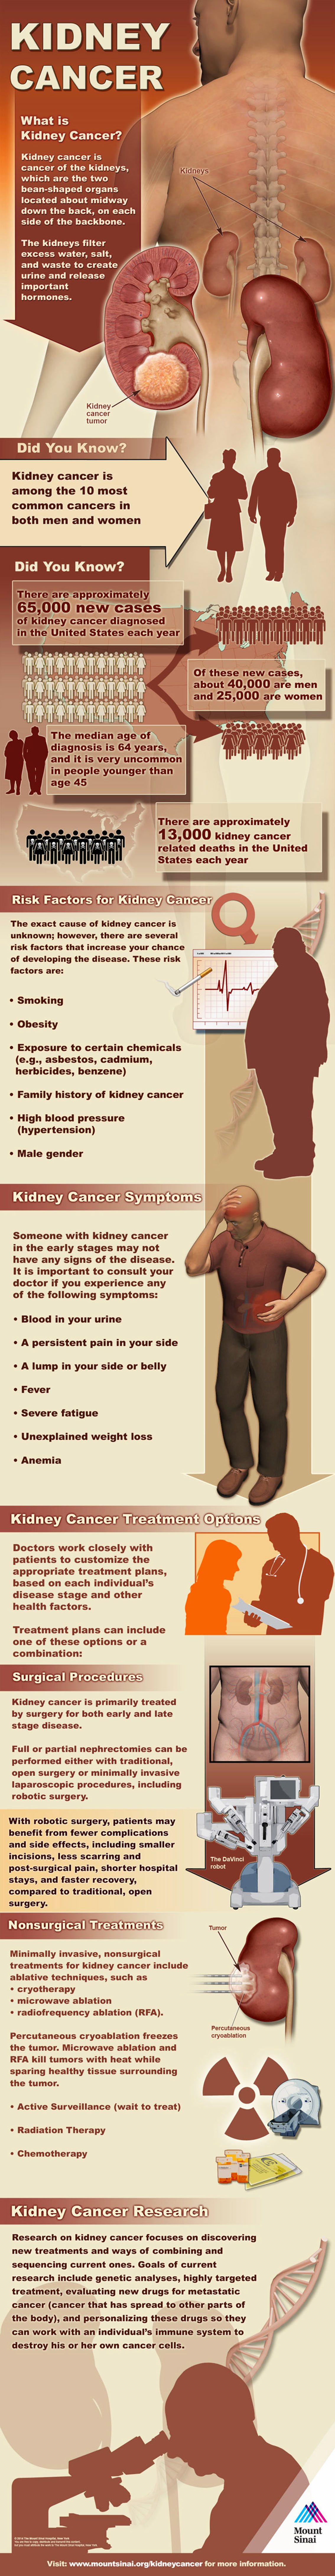 Kidney Cancer Symptoms and Treatment - Health Infographic